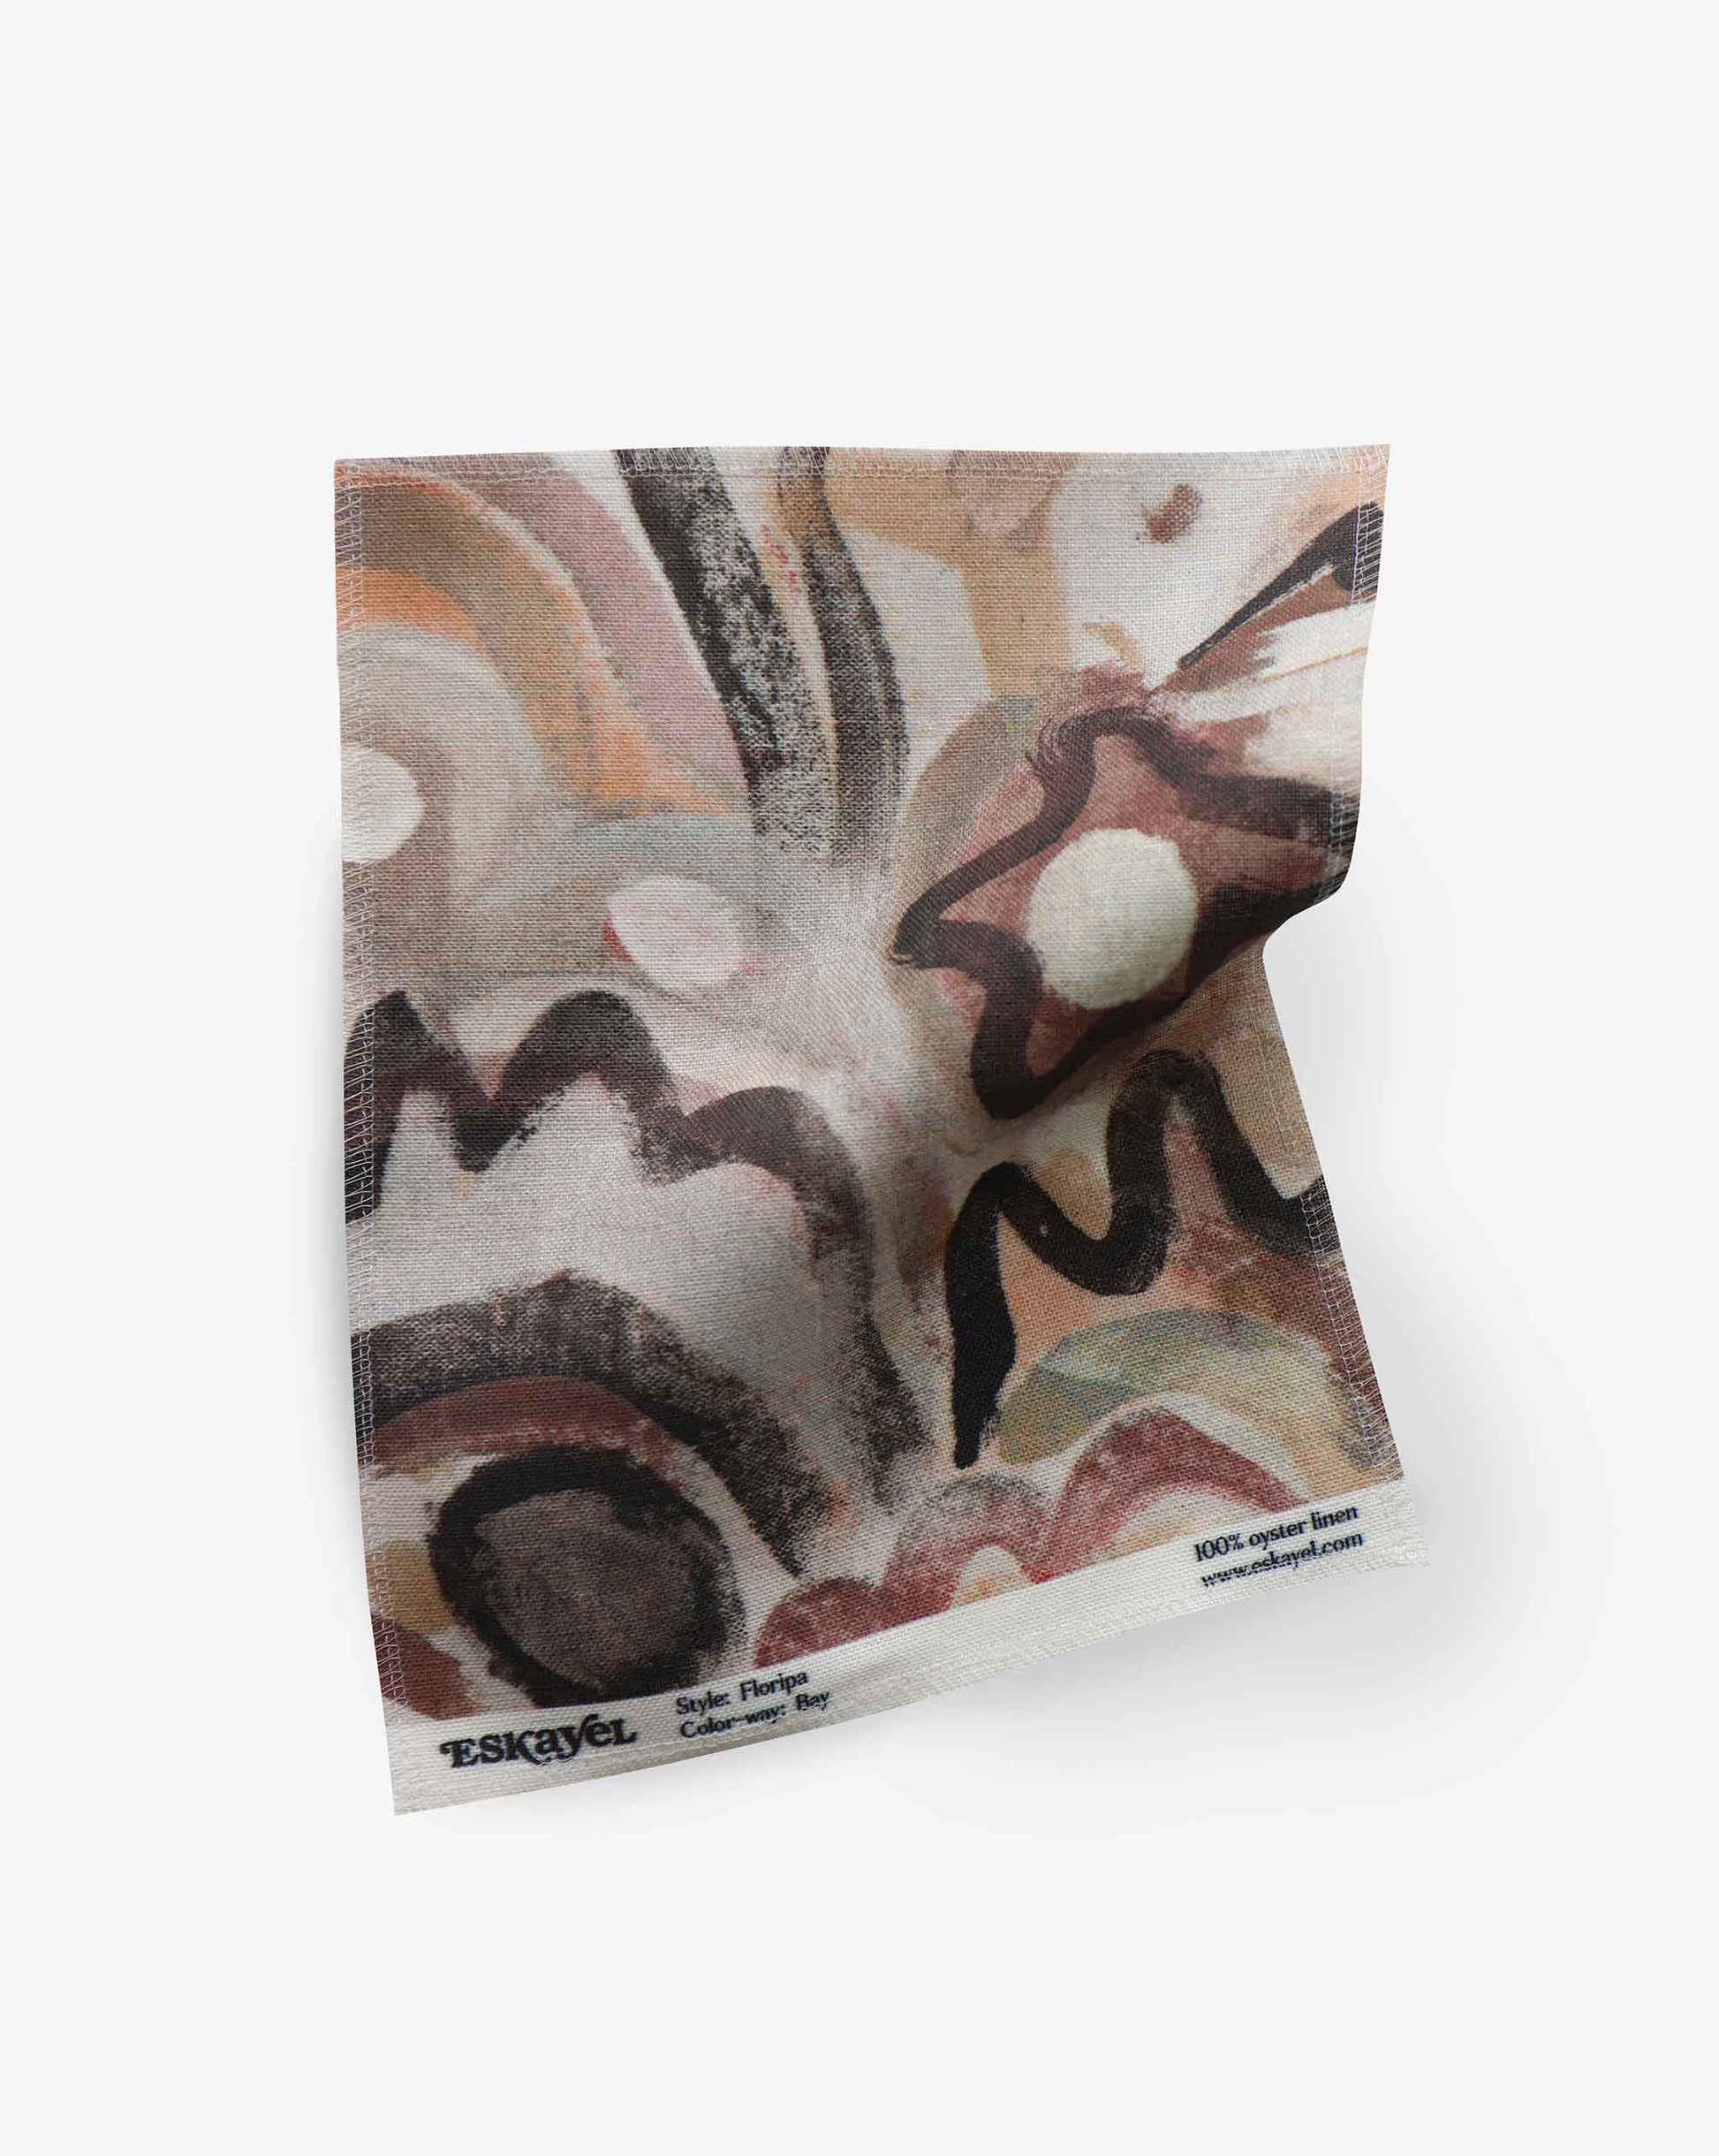 A fabric swatch with our Floripa pattern in Bay featuring a design inspired by the beautiful tropical island of Florianopolis in Brazil that provides a colorway of brown tones.